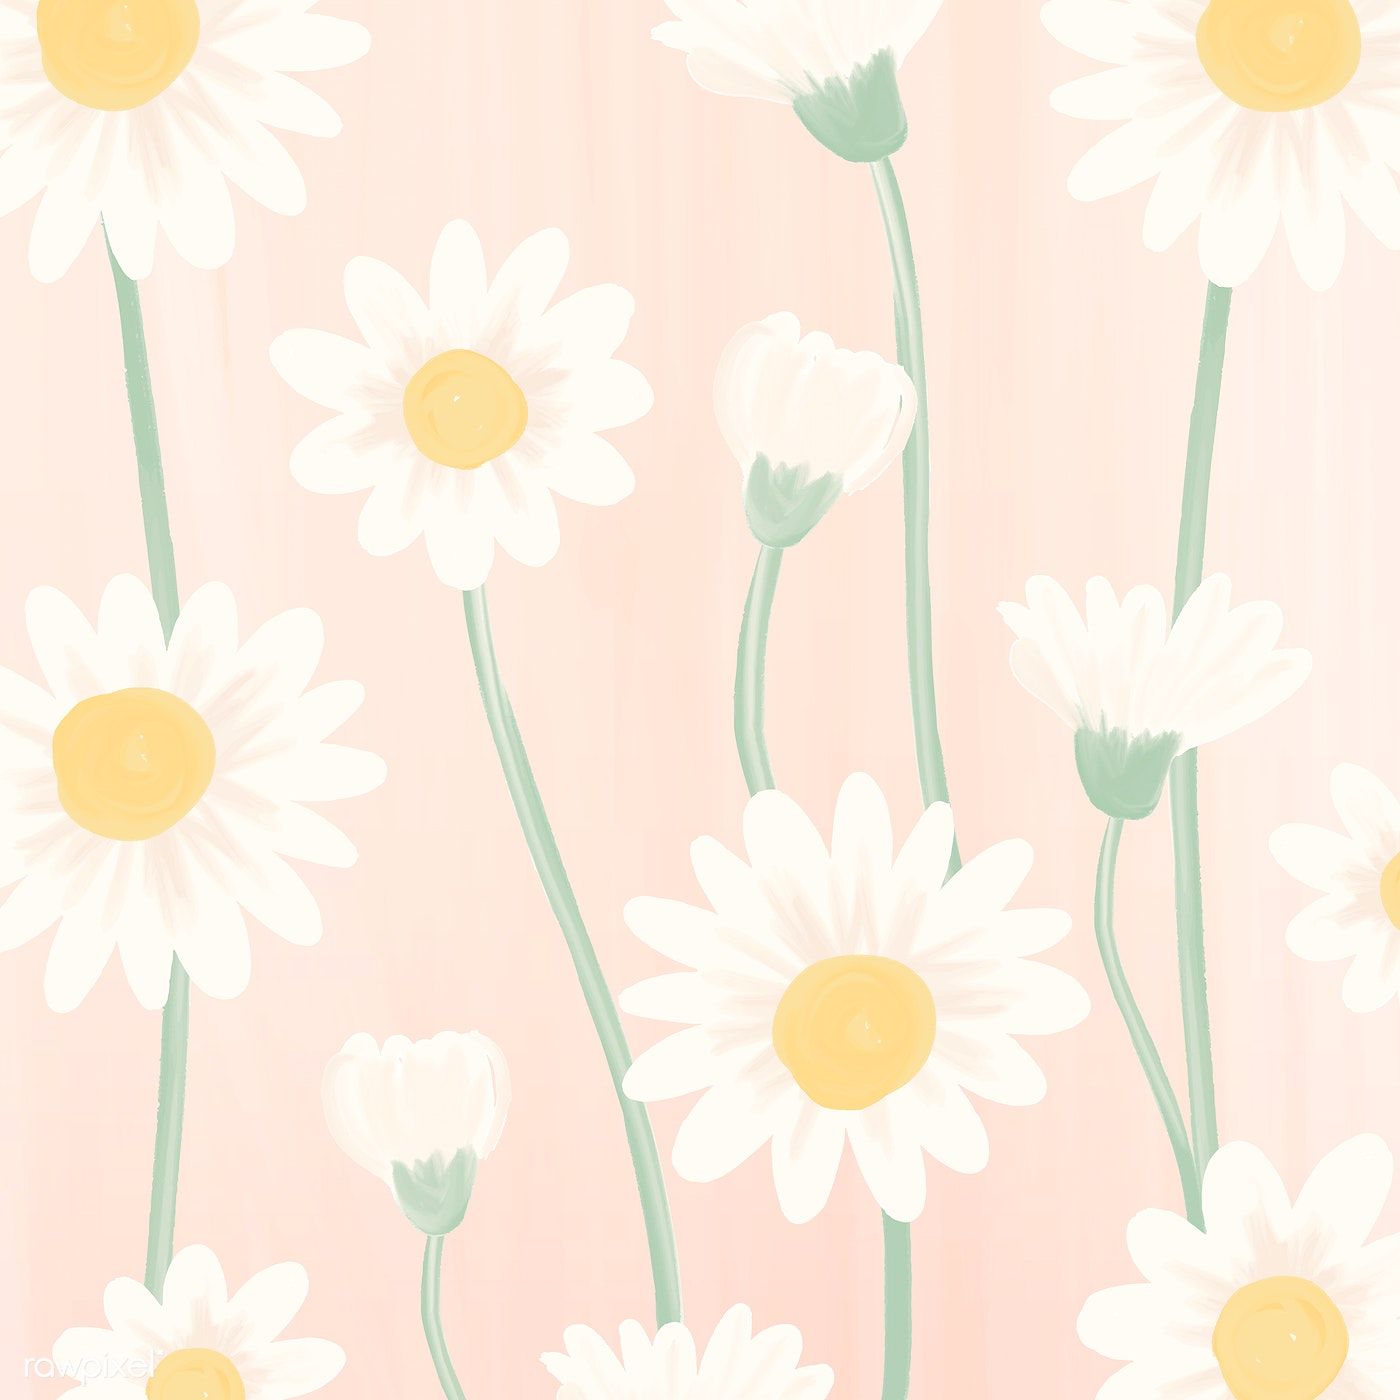 Premium Vector Of Hand Drawn Daisy Patterned Background